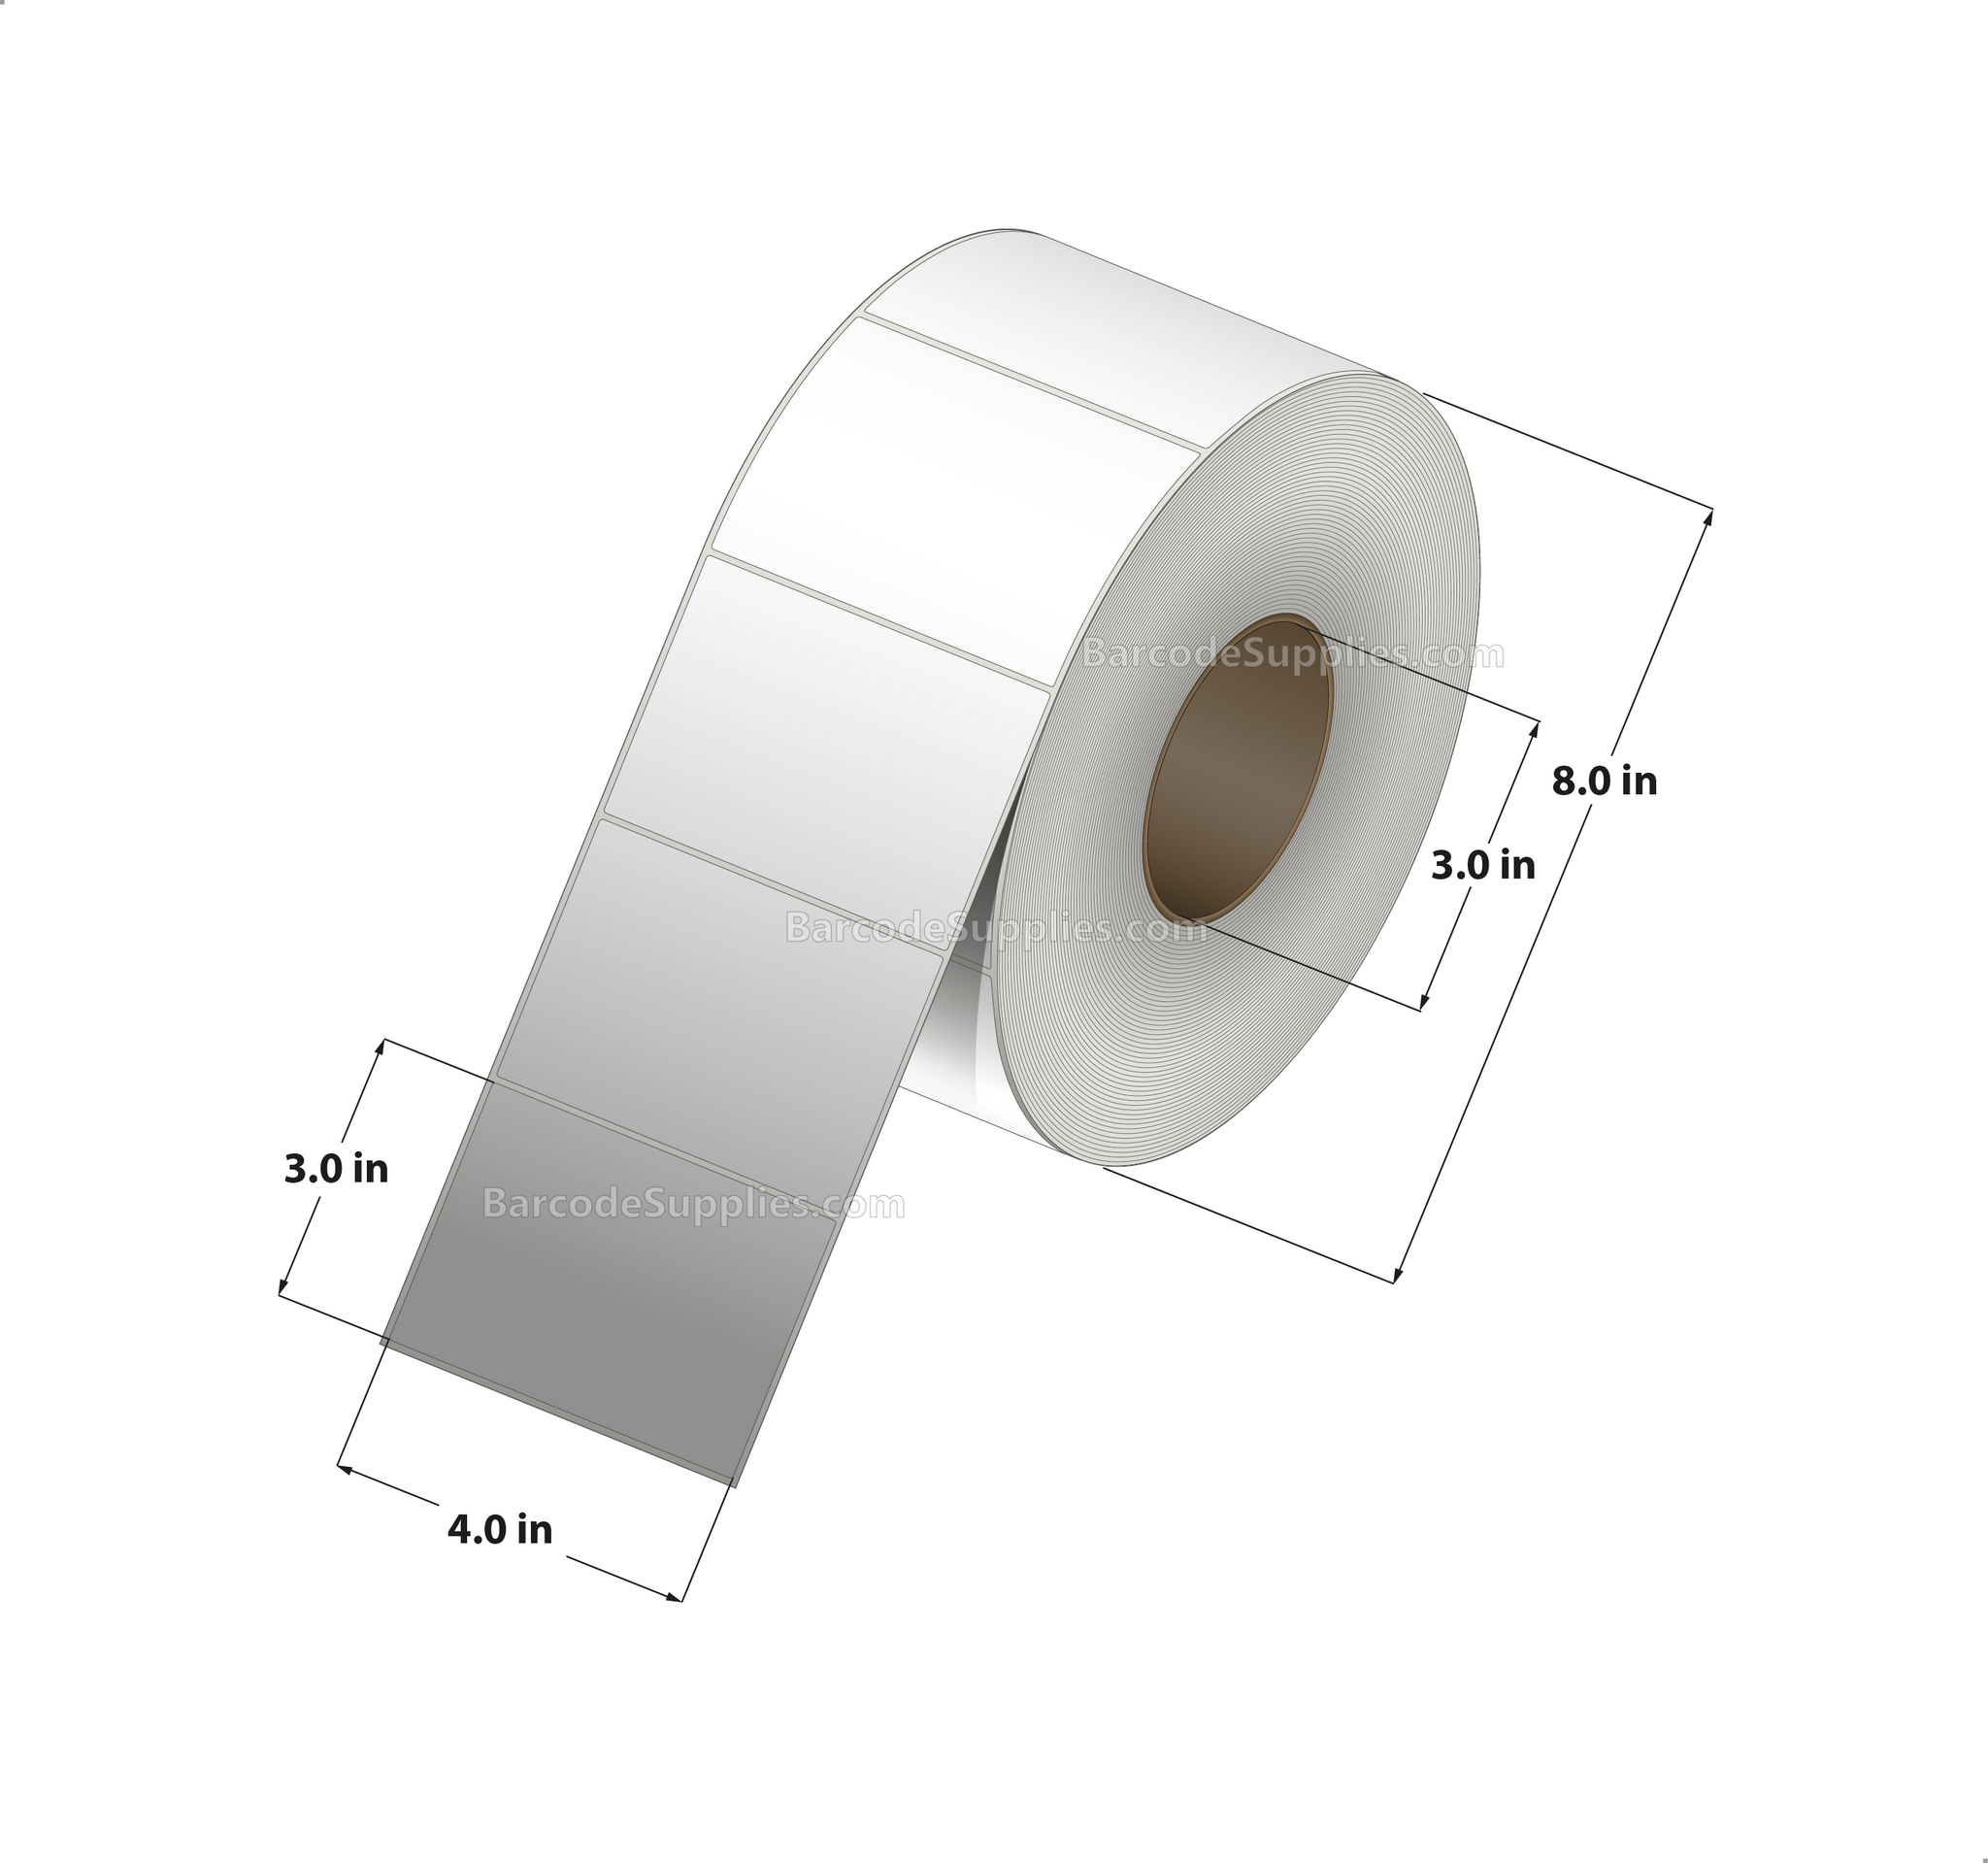 4 x 3 Thermal Transfer White Labels With Rubber Adhesive - No Perforation - 2400 Labels Per Roll - Carton Of 4 Rolls - 9600 Labels Total - MPN: CTT400300-3